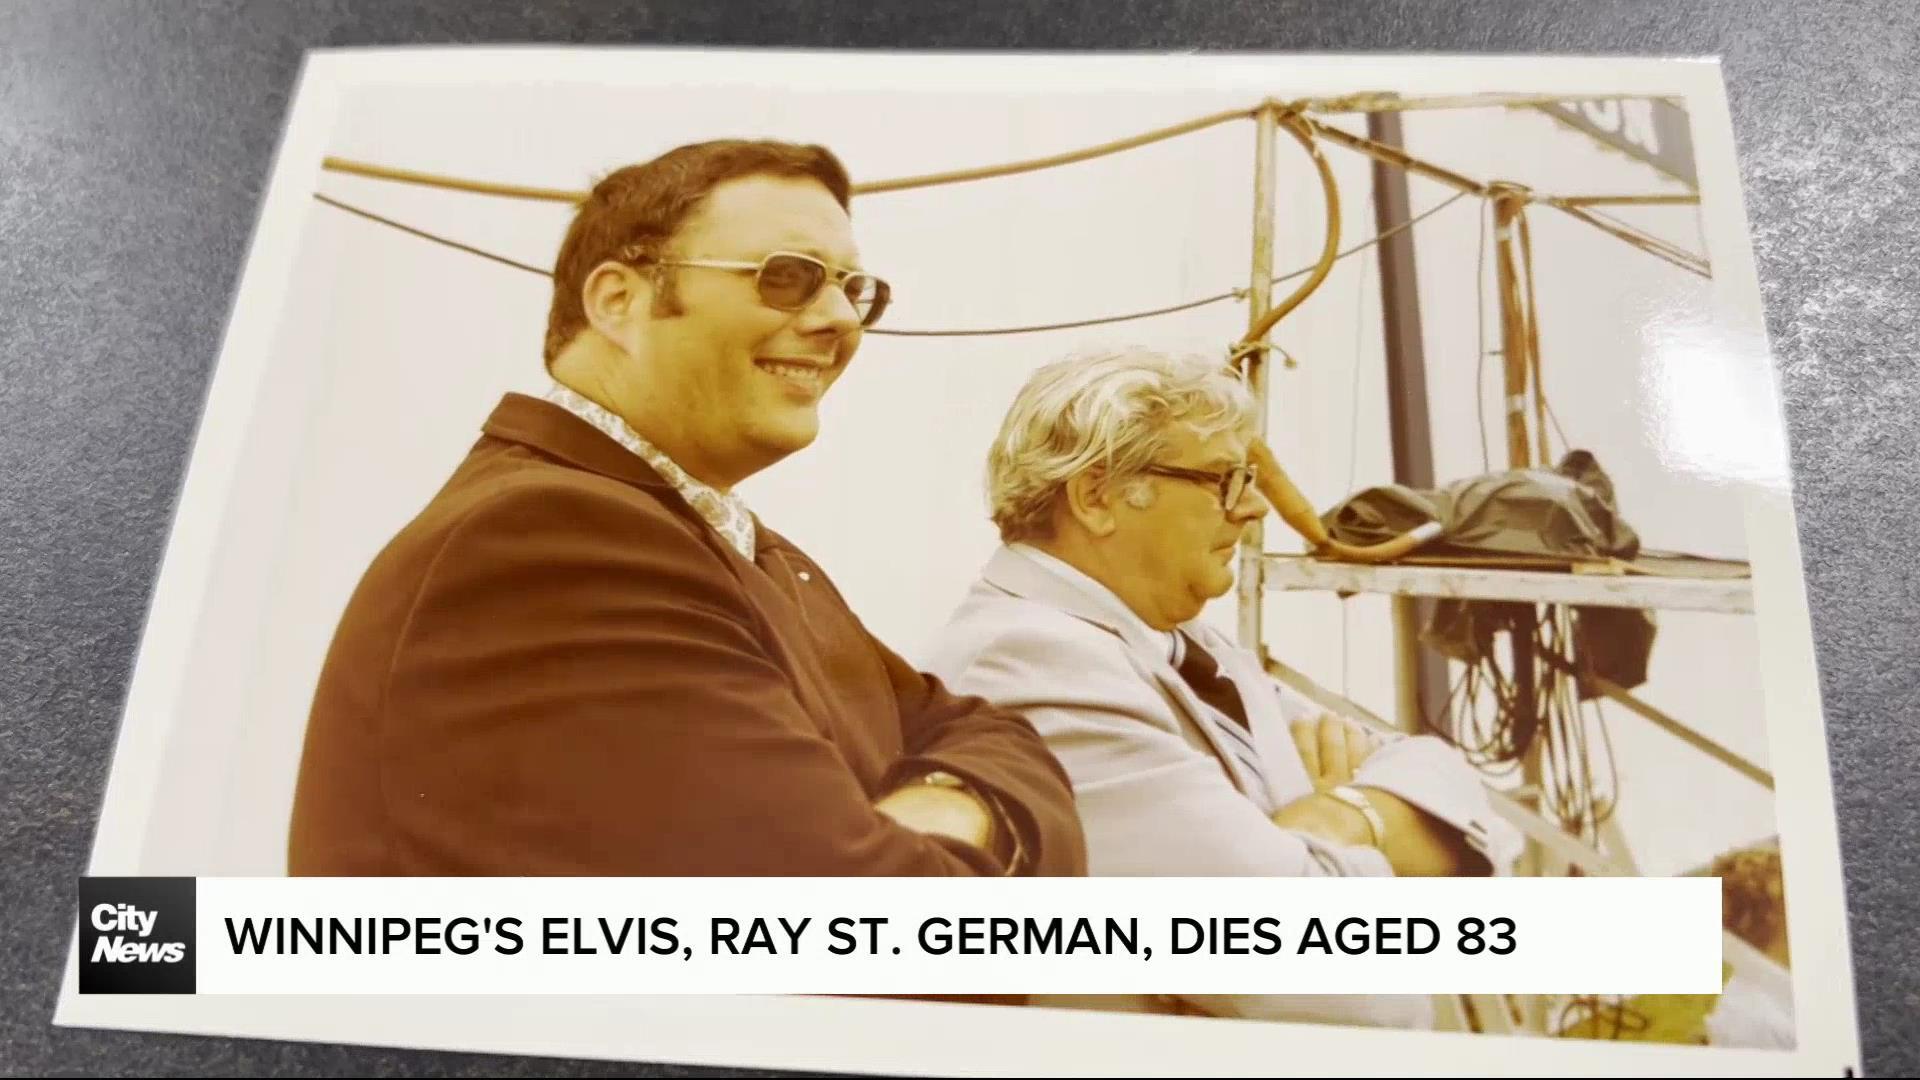 Winnipeg’s Elvis, Ray St. Germain, passes away at the age of 83